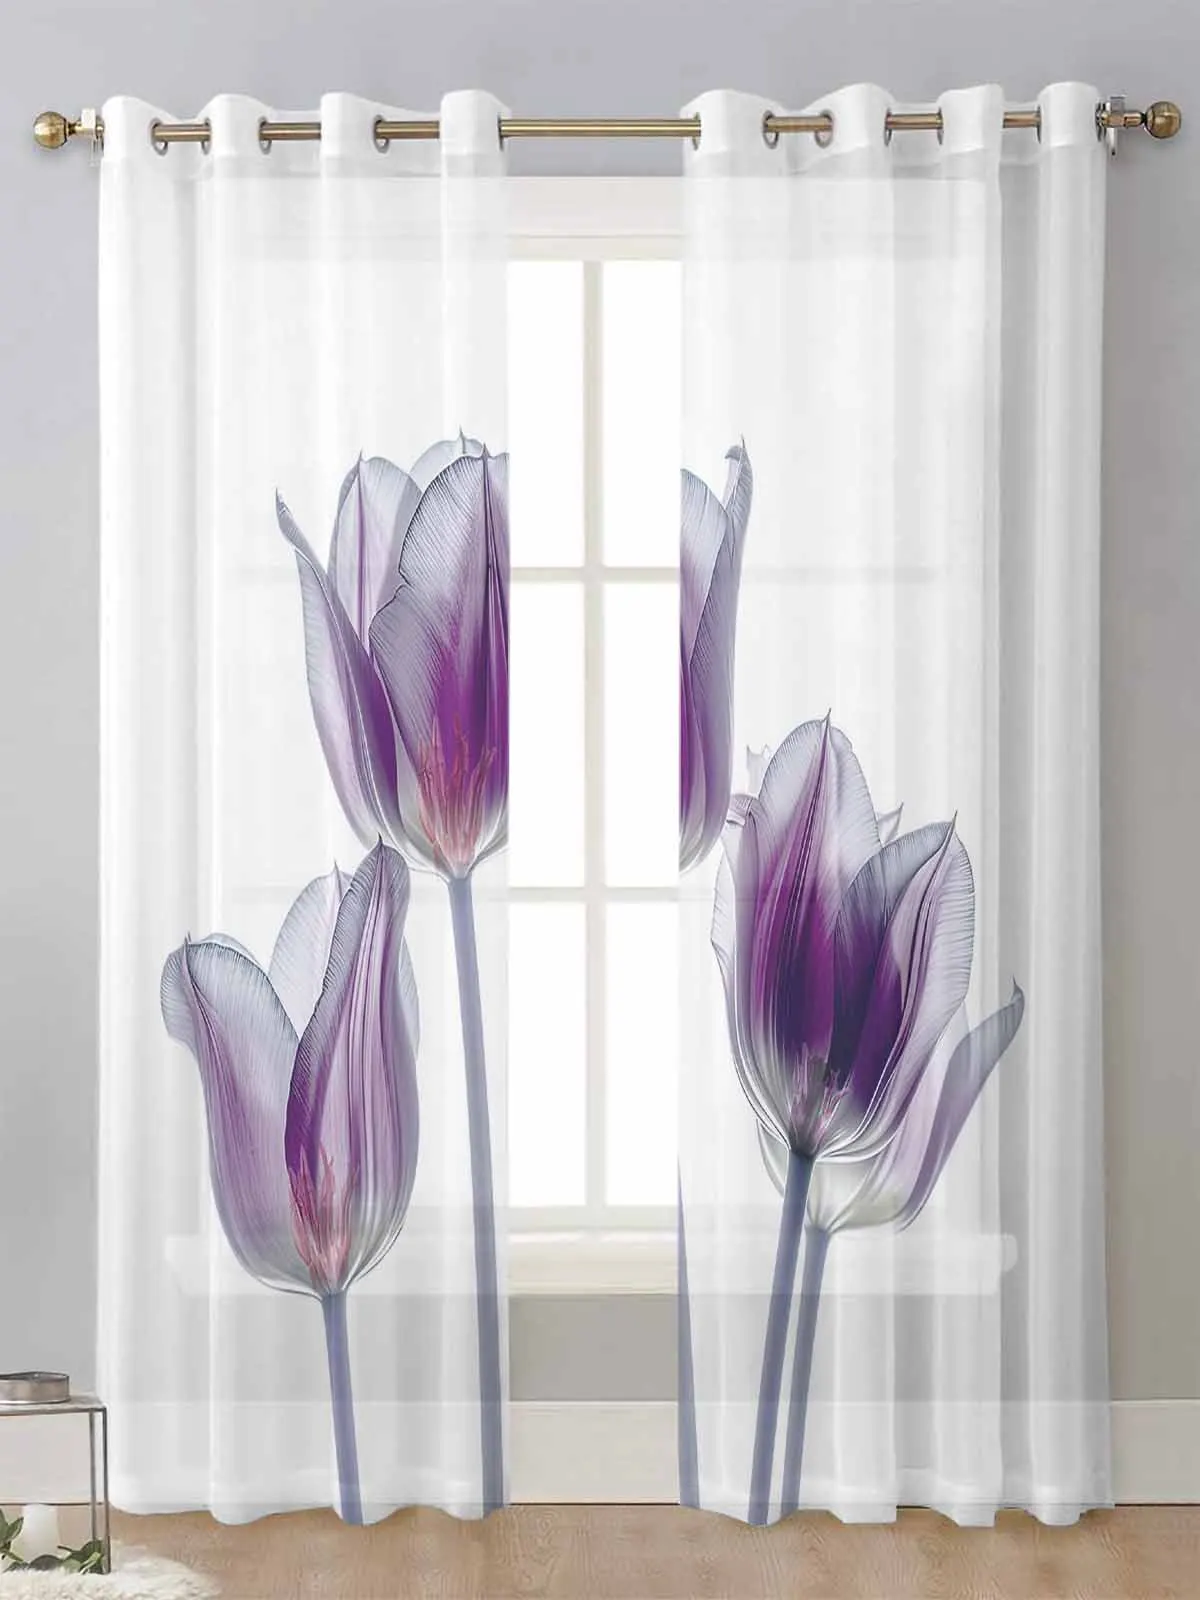 

Flower Tulip Purple Abstract Sheer Curtains For Living Room Window Transparent Voile Tulle Curtain Cortinas Drapes Home Decor